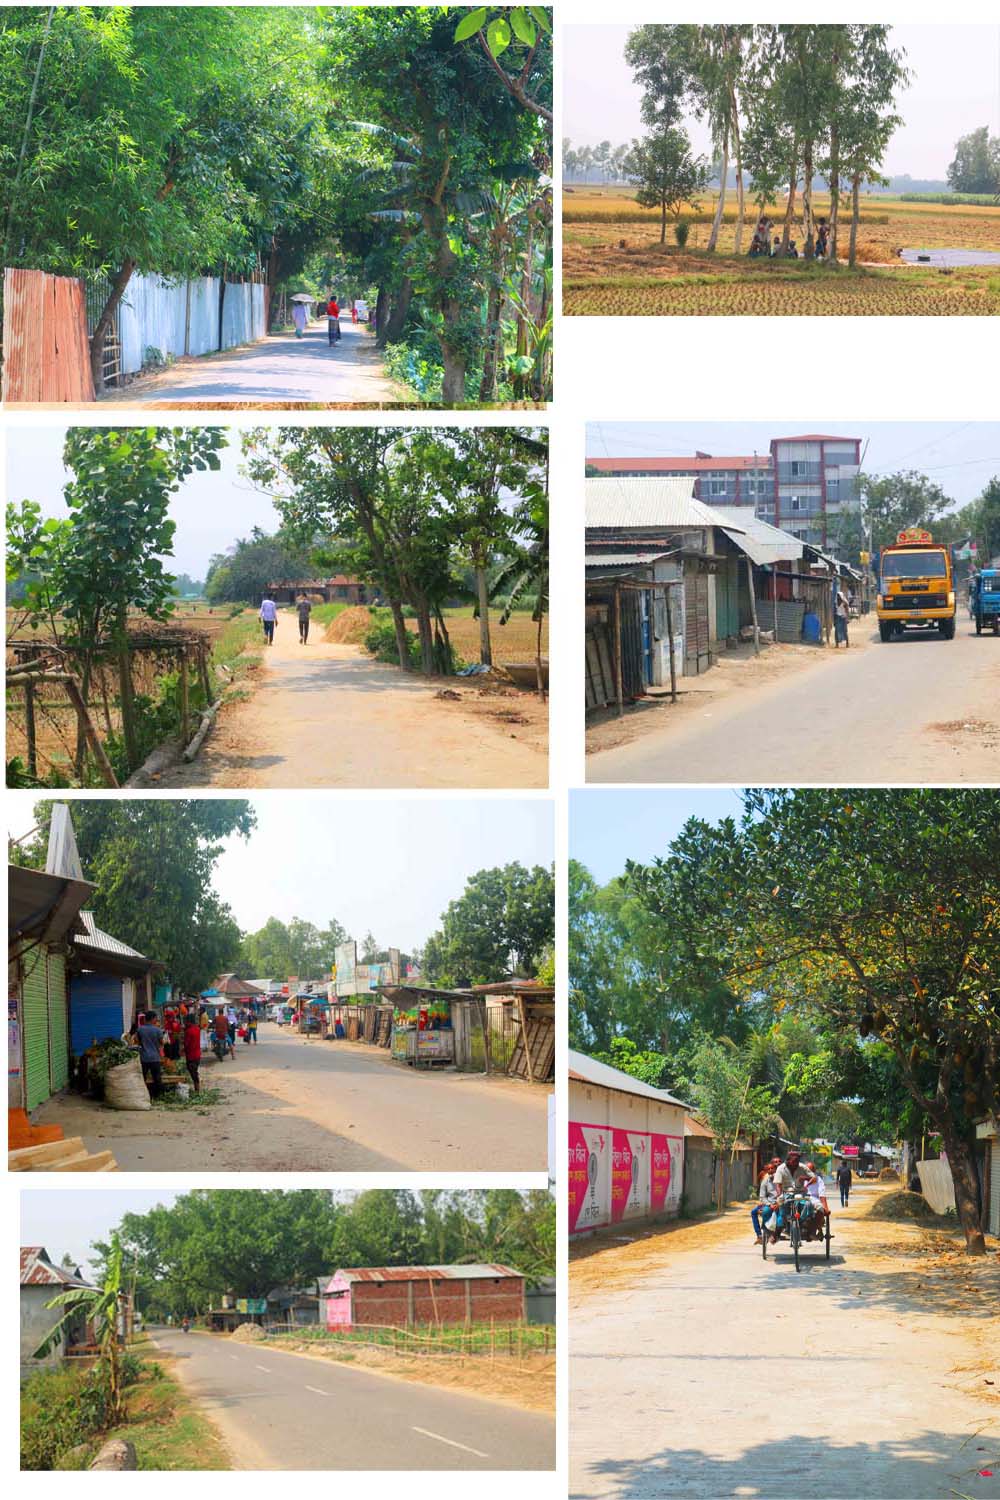 village, people & roads stock photos in Bangladesh pinterest preview image.